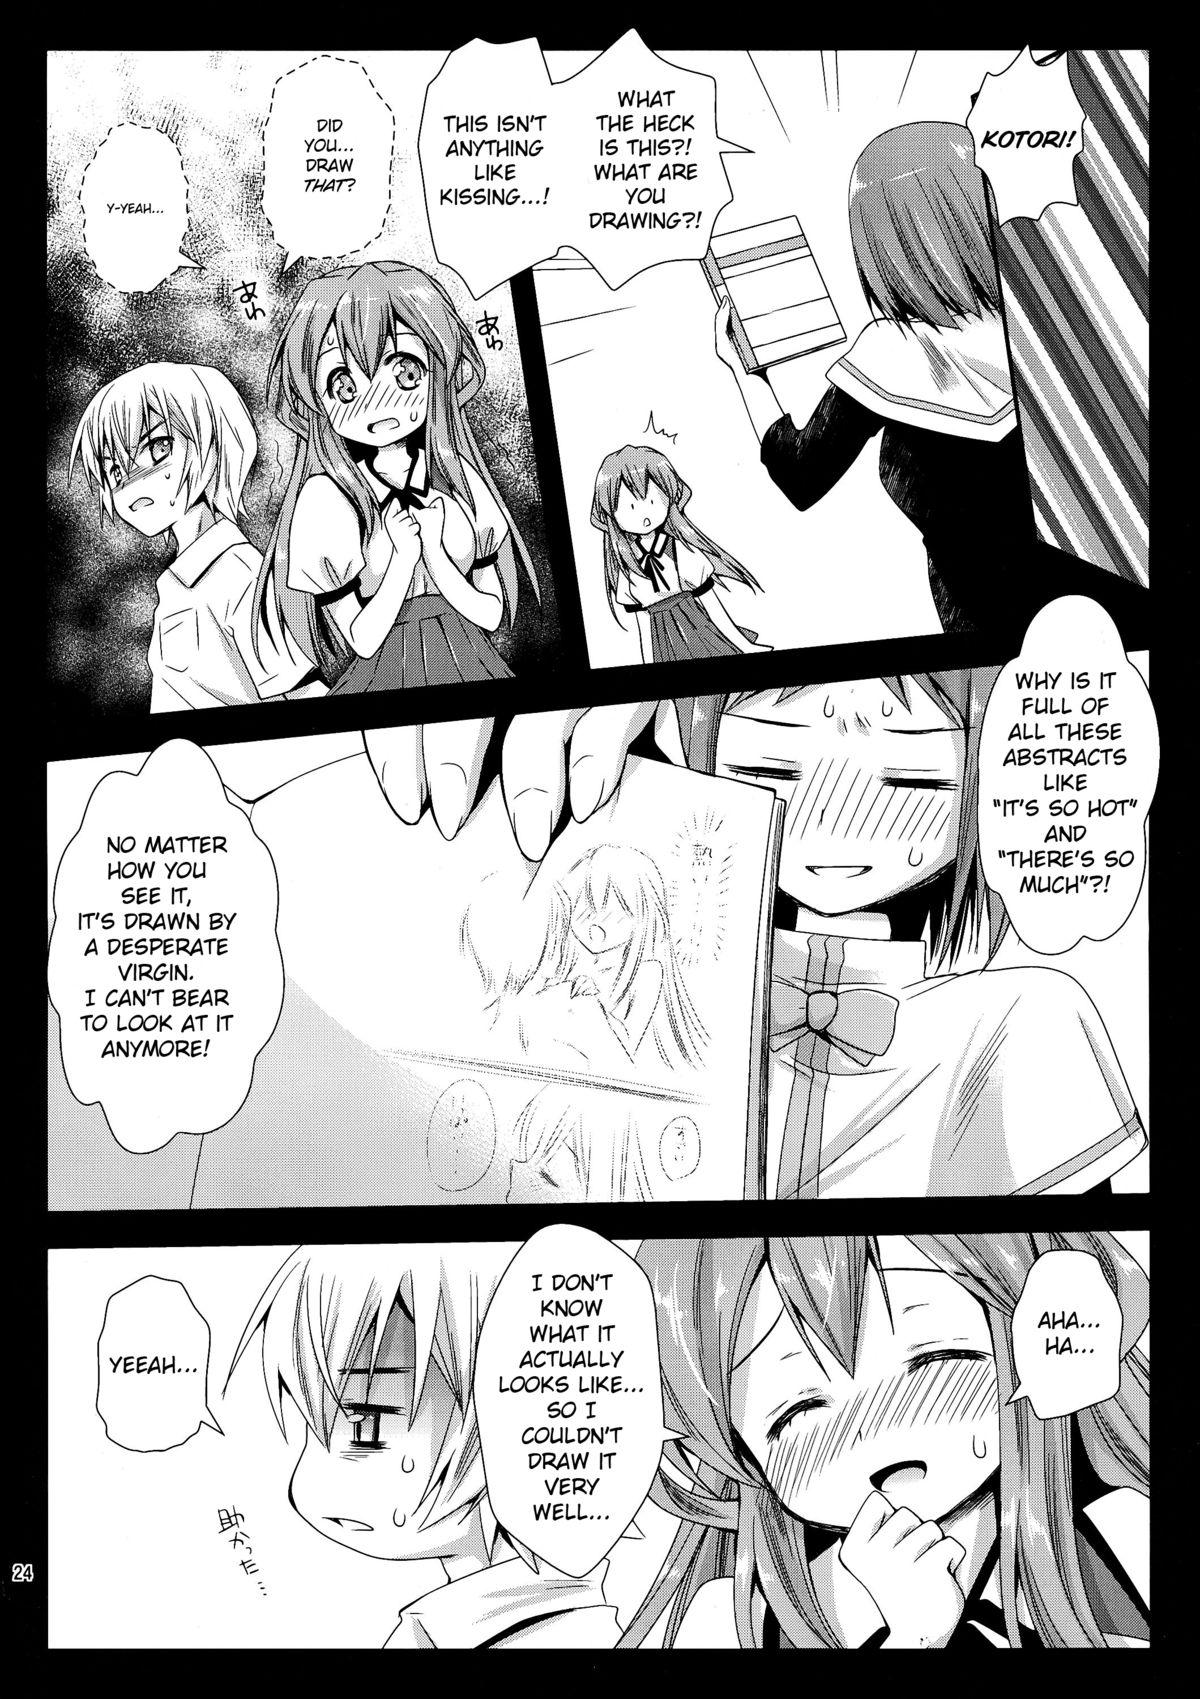 Free Porn Amateur Kotori Hang Up! - Brynhildr in the darkness Abg - Page 24